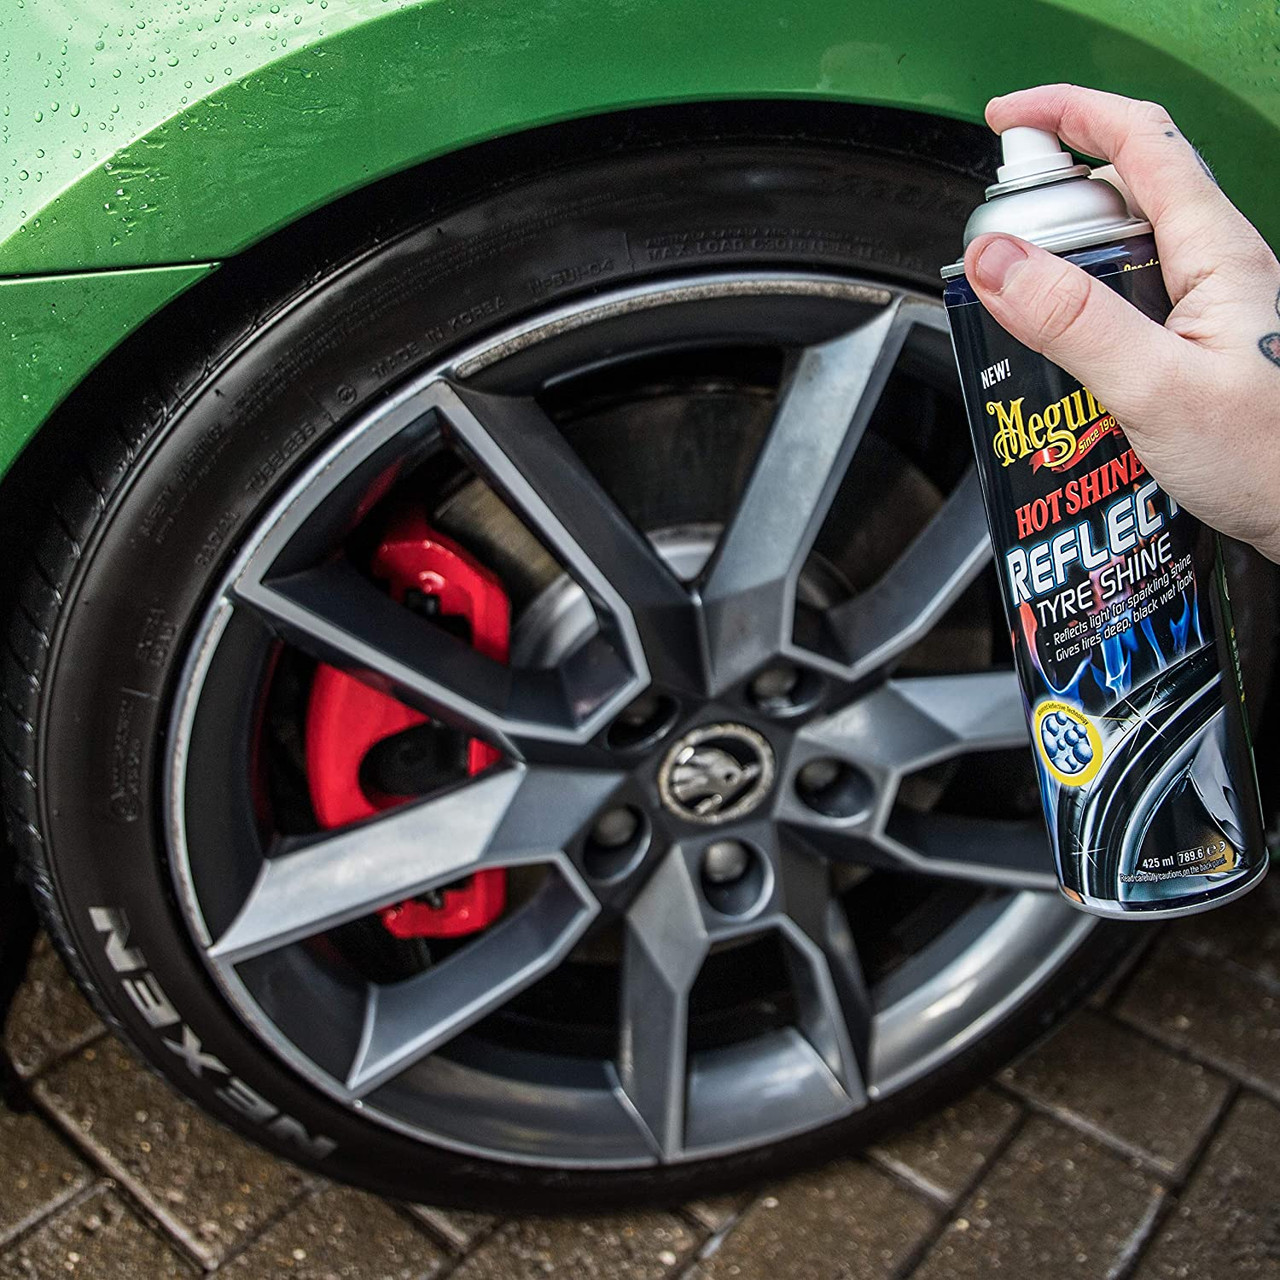 Meguiars Hot Shine Tire Spray is a aerosol spray tire protectant &  dressing. Meguiars leaves a high gloss shine on rubber tires.